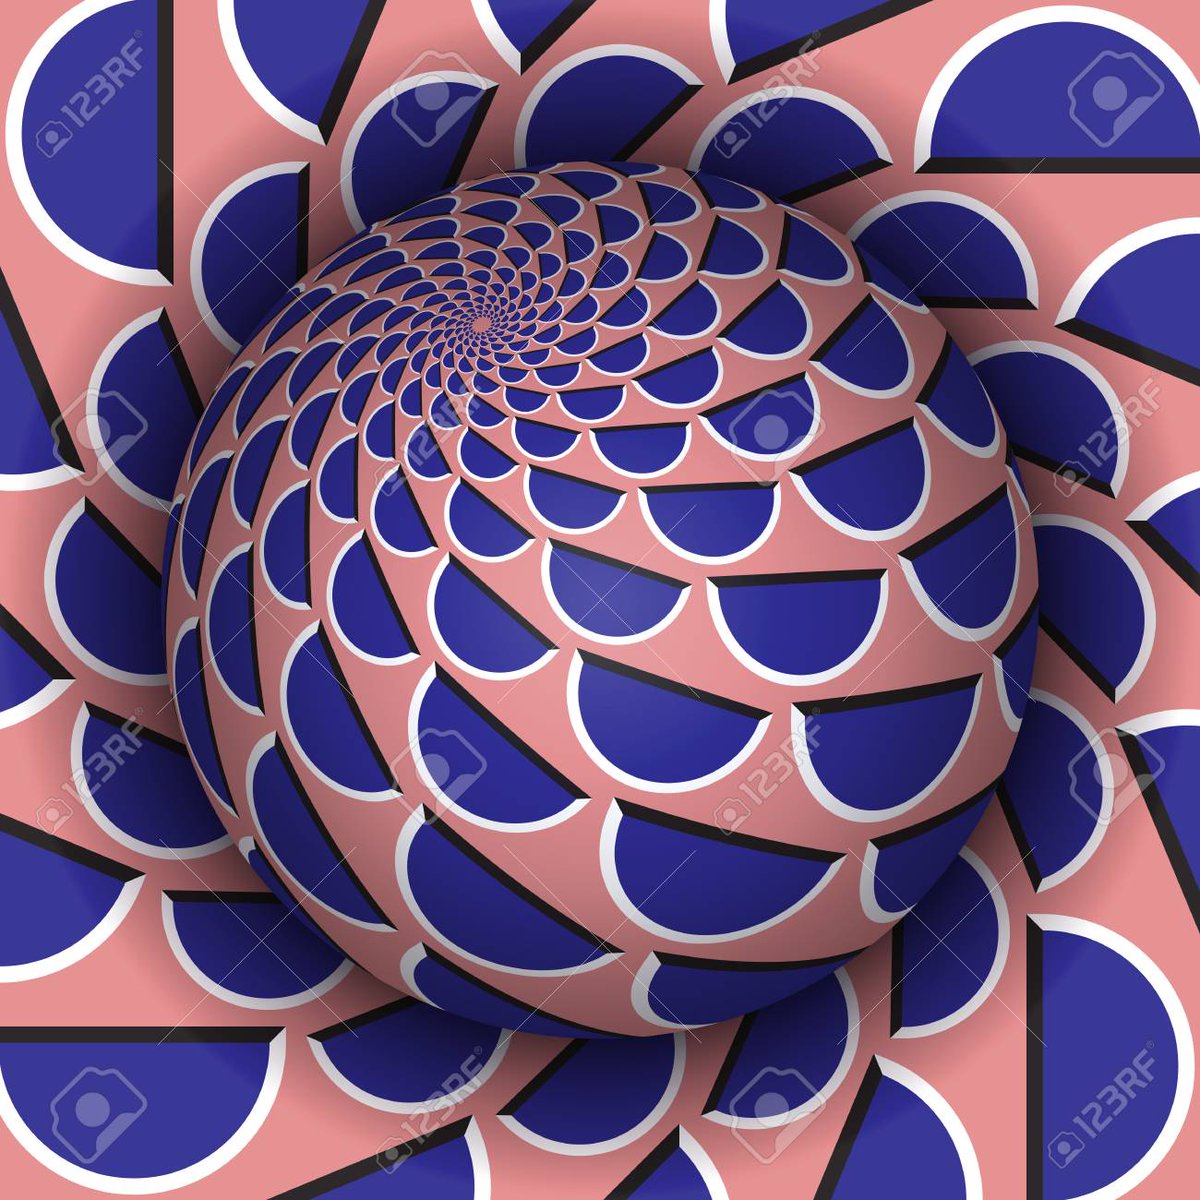 123rf.com/photo_10681760… Abstract 3d spiral background. #Psychedelicdesign. #Vectorillustration.